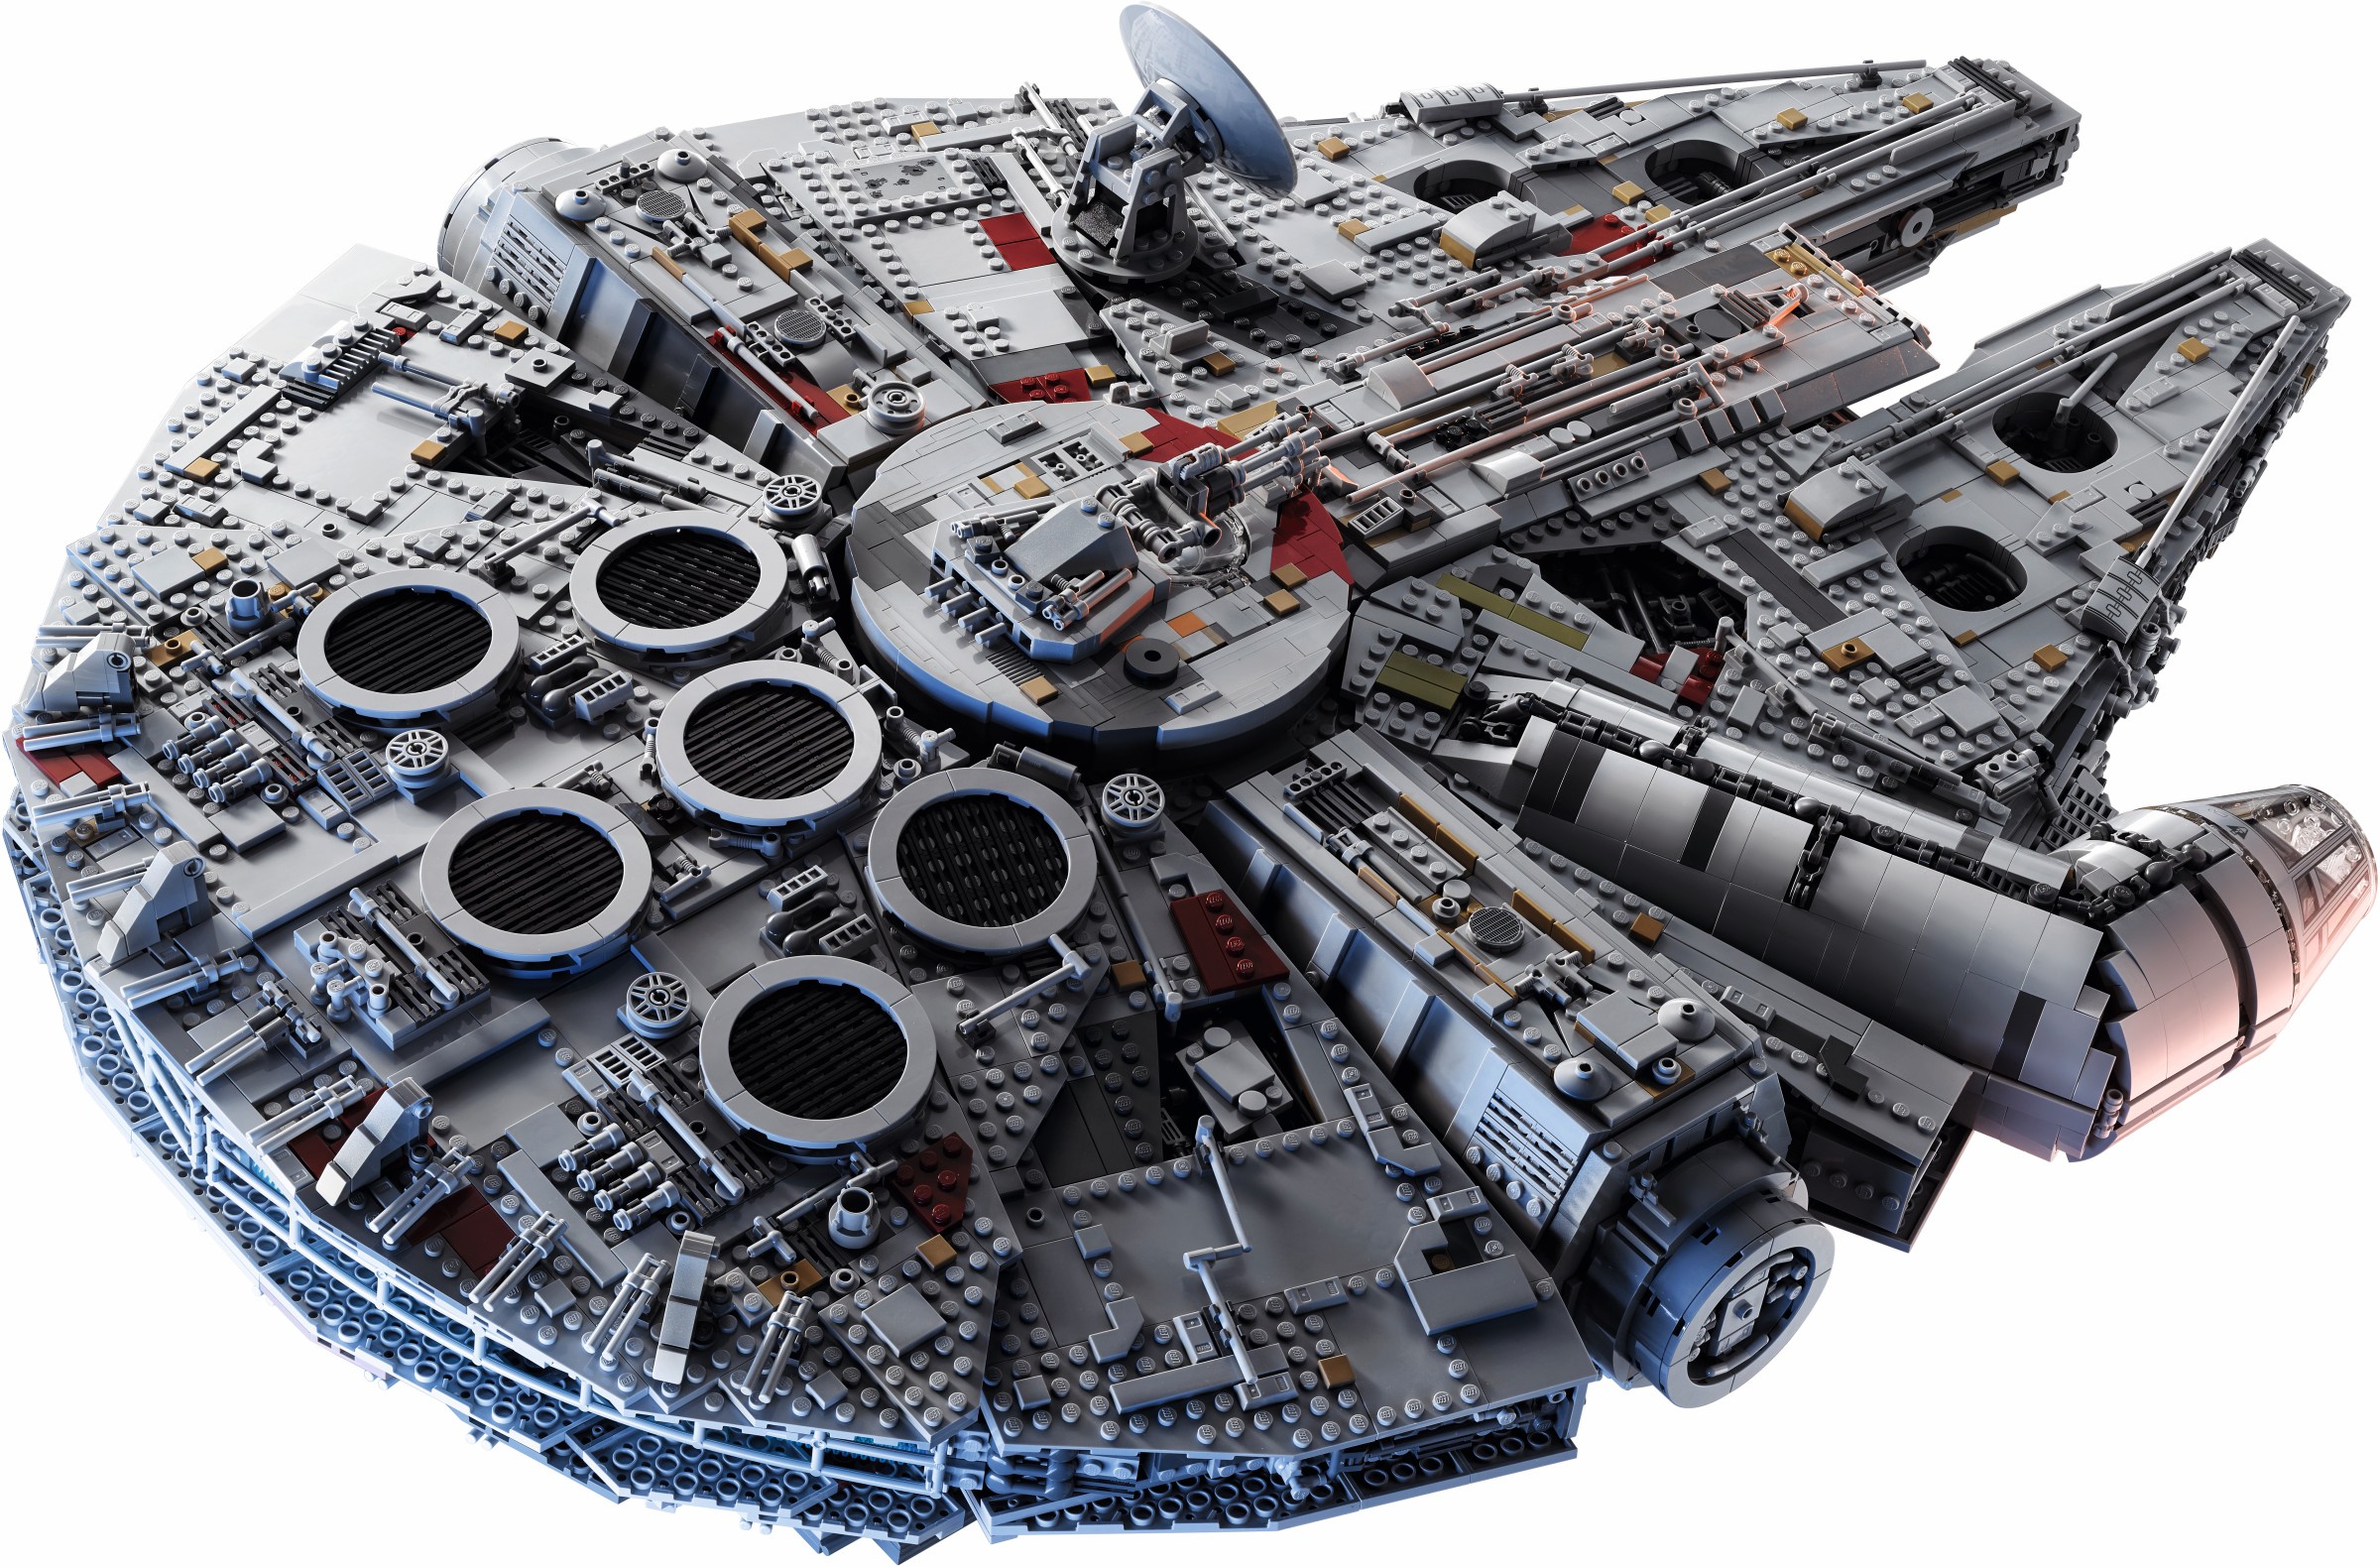 Star Wars 75192 Millennium Falcon turns five years old